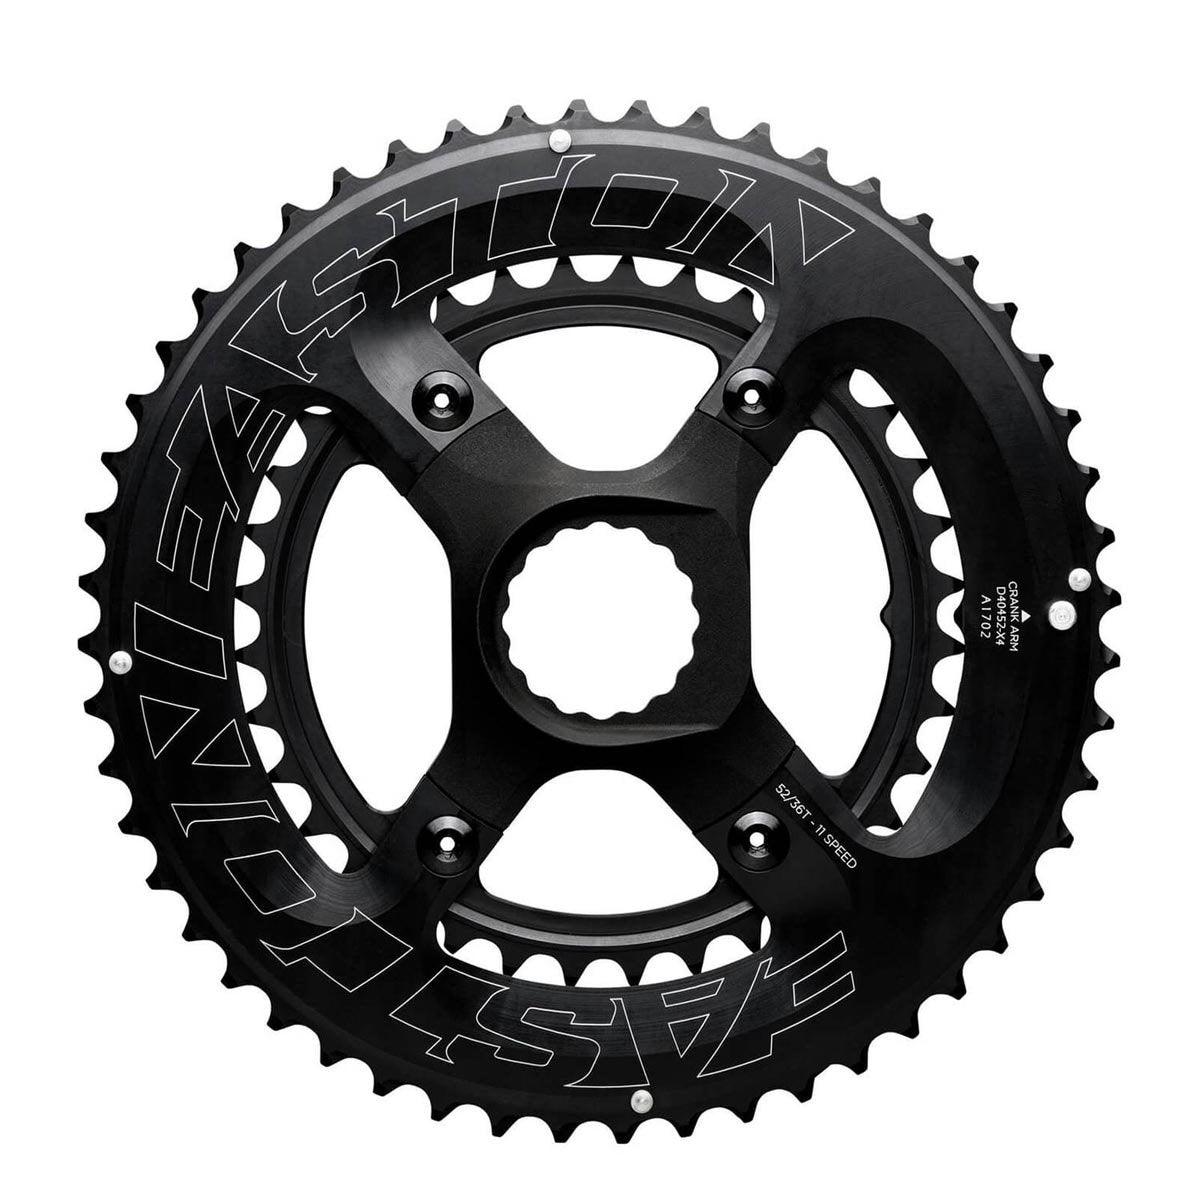 Easton Easton Direct Mount Spider/ Chainrings 52/36t